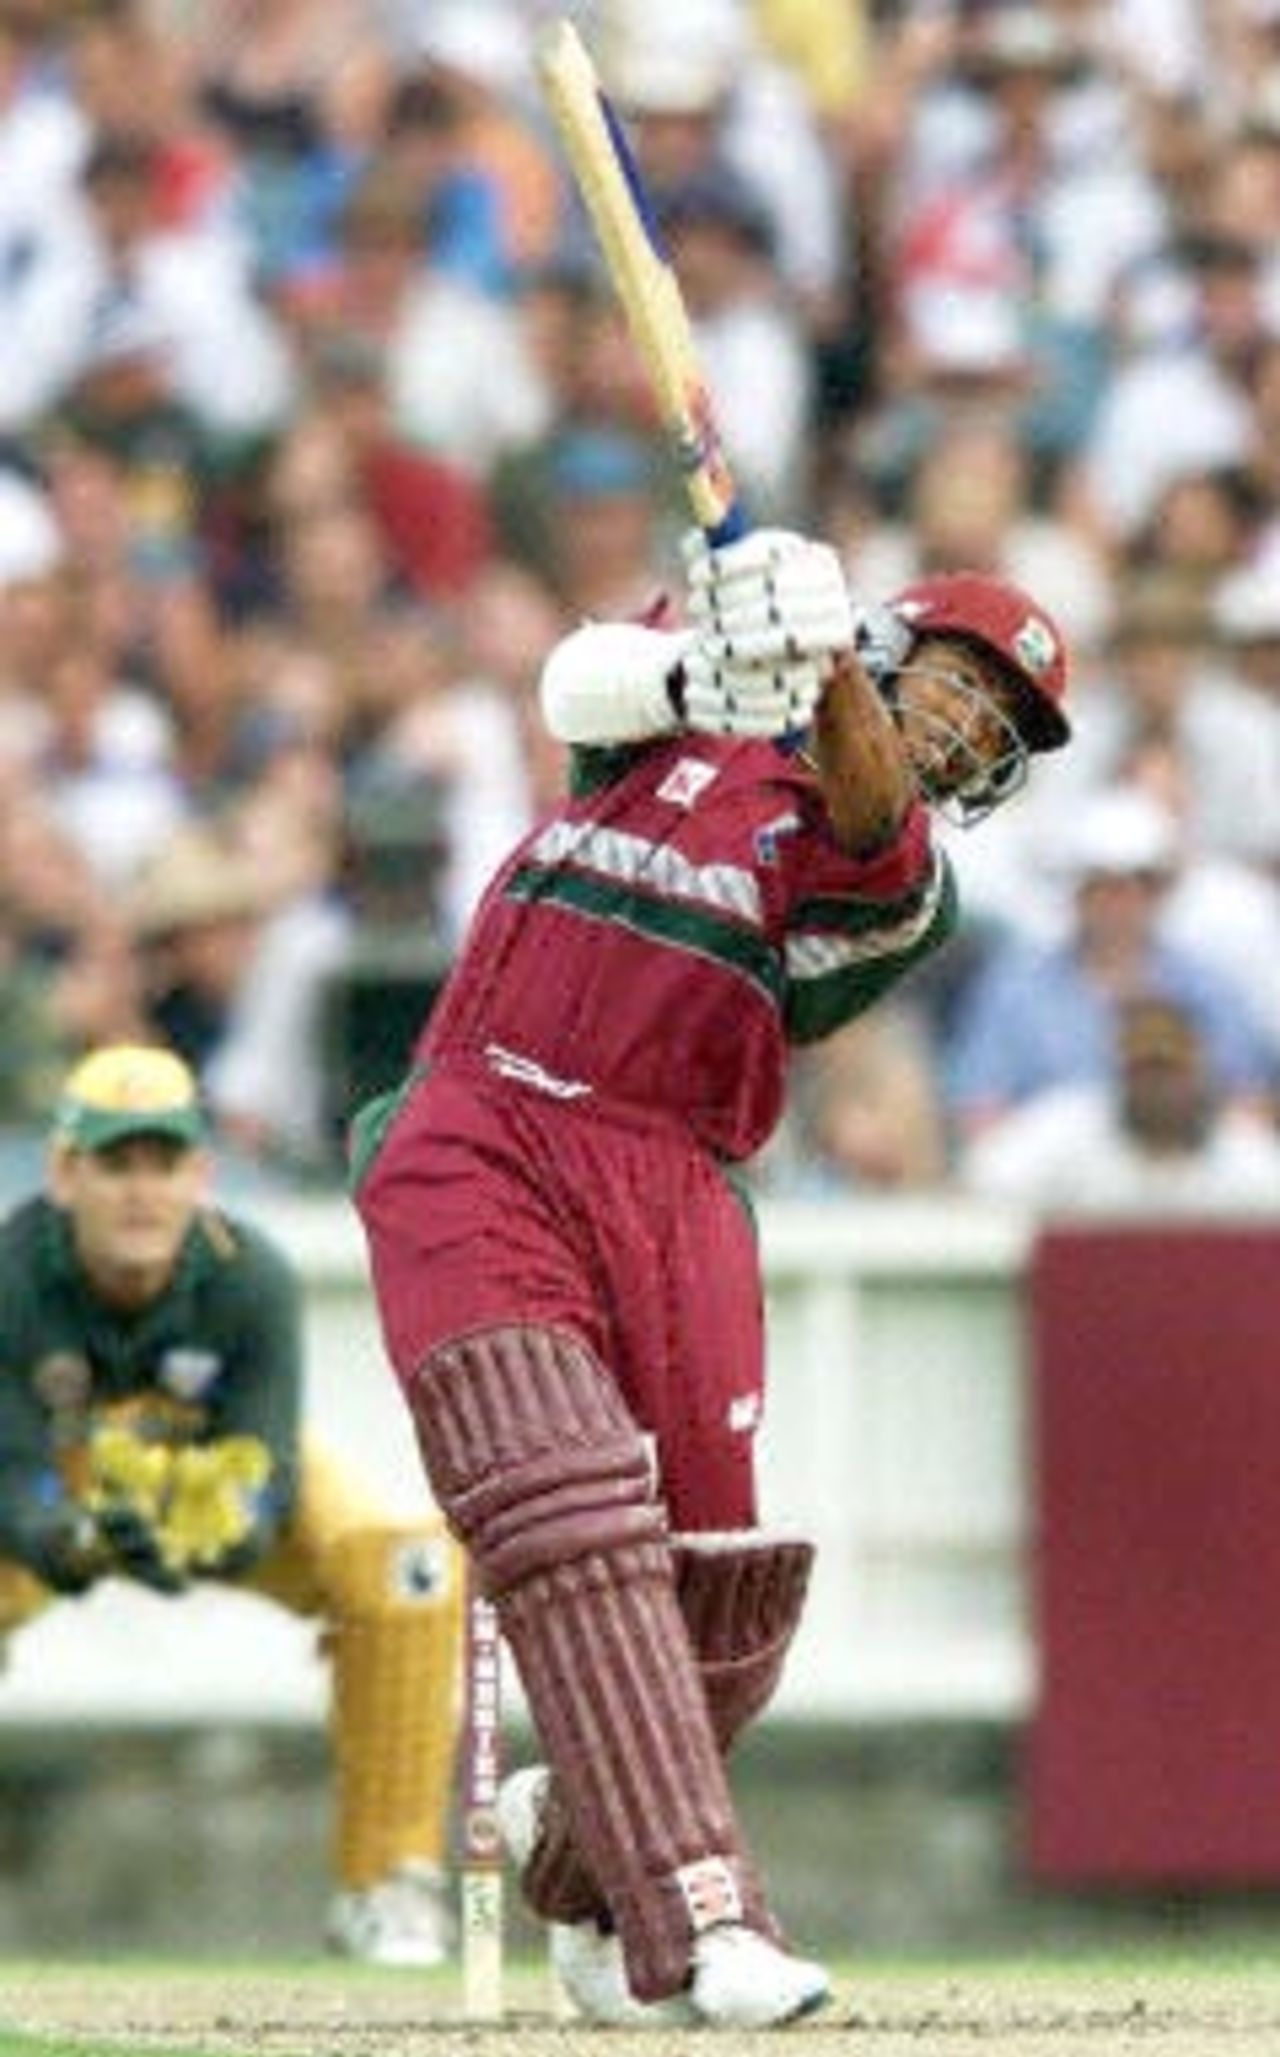 West Indies batsman Brian Lara hits out against the Australian bowling in their match at the MCG in Melbourne, 11 January 2000. Australia scored 267-6 off their 50 overs and then restricted the West Indies to 193-7 from their 50 overs to go one up in the tri-nations series which also includes Zimbabwe